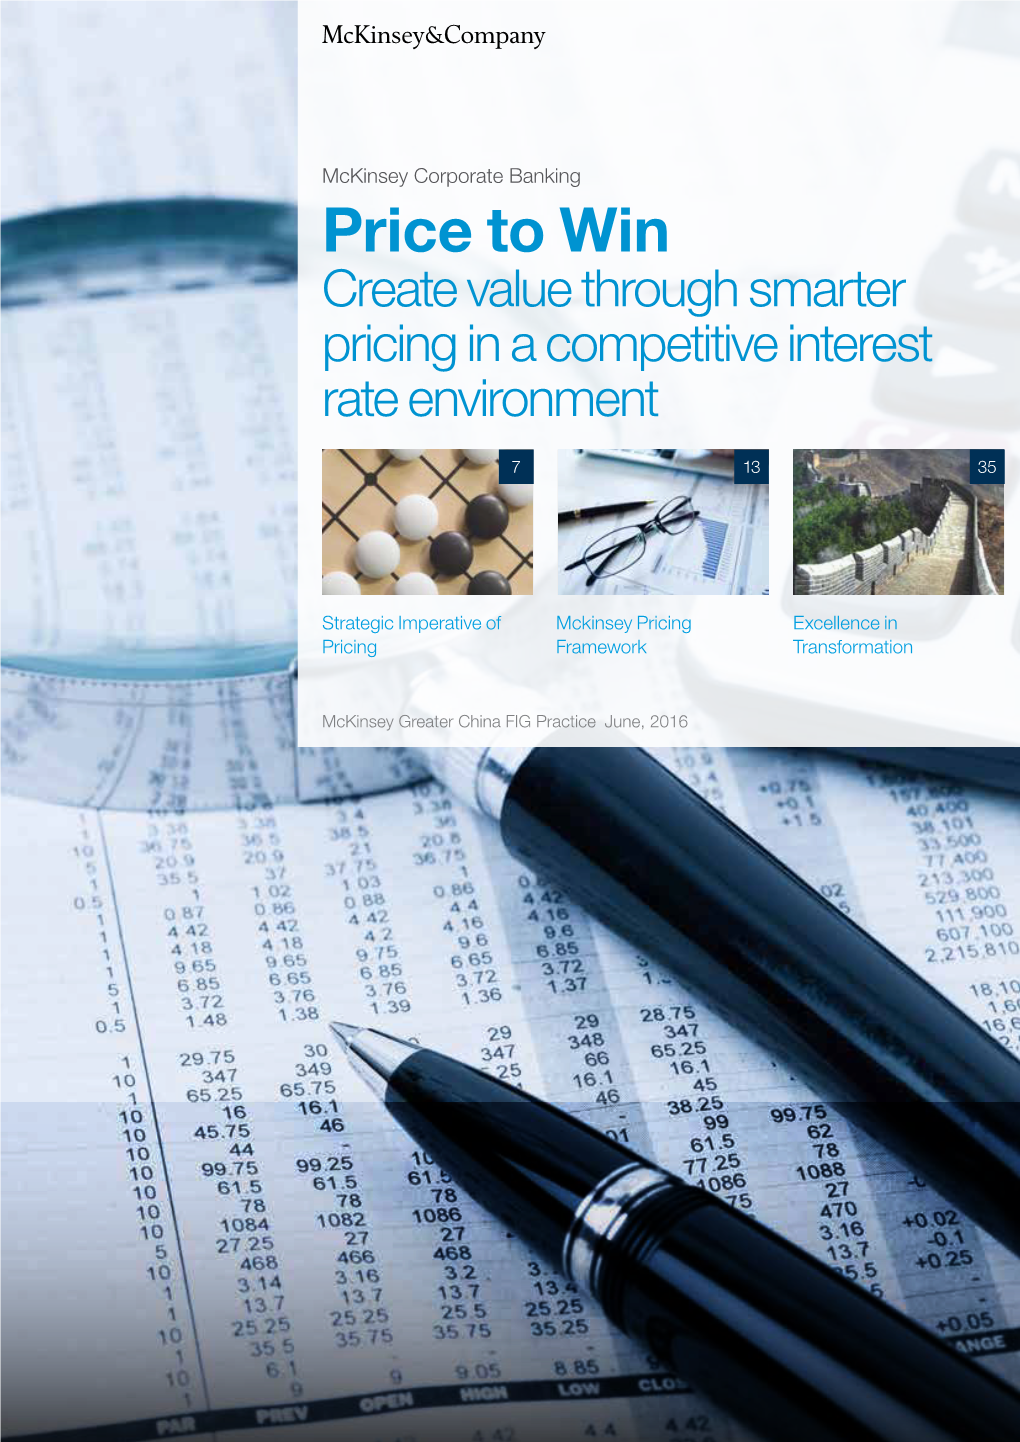 Price to Win: Create Value Through Smarter Pricing in a Competitive